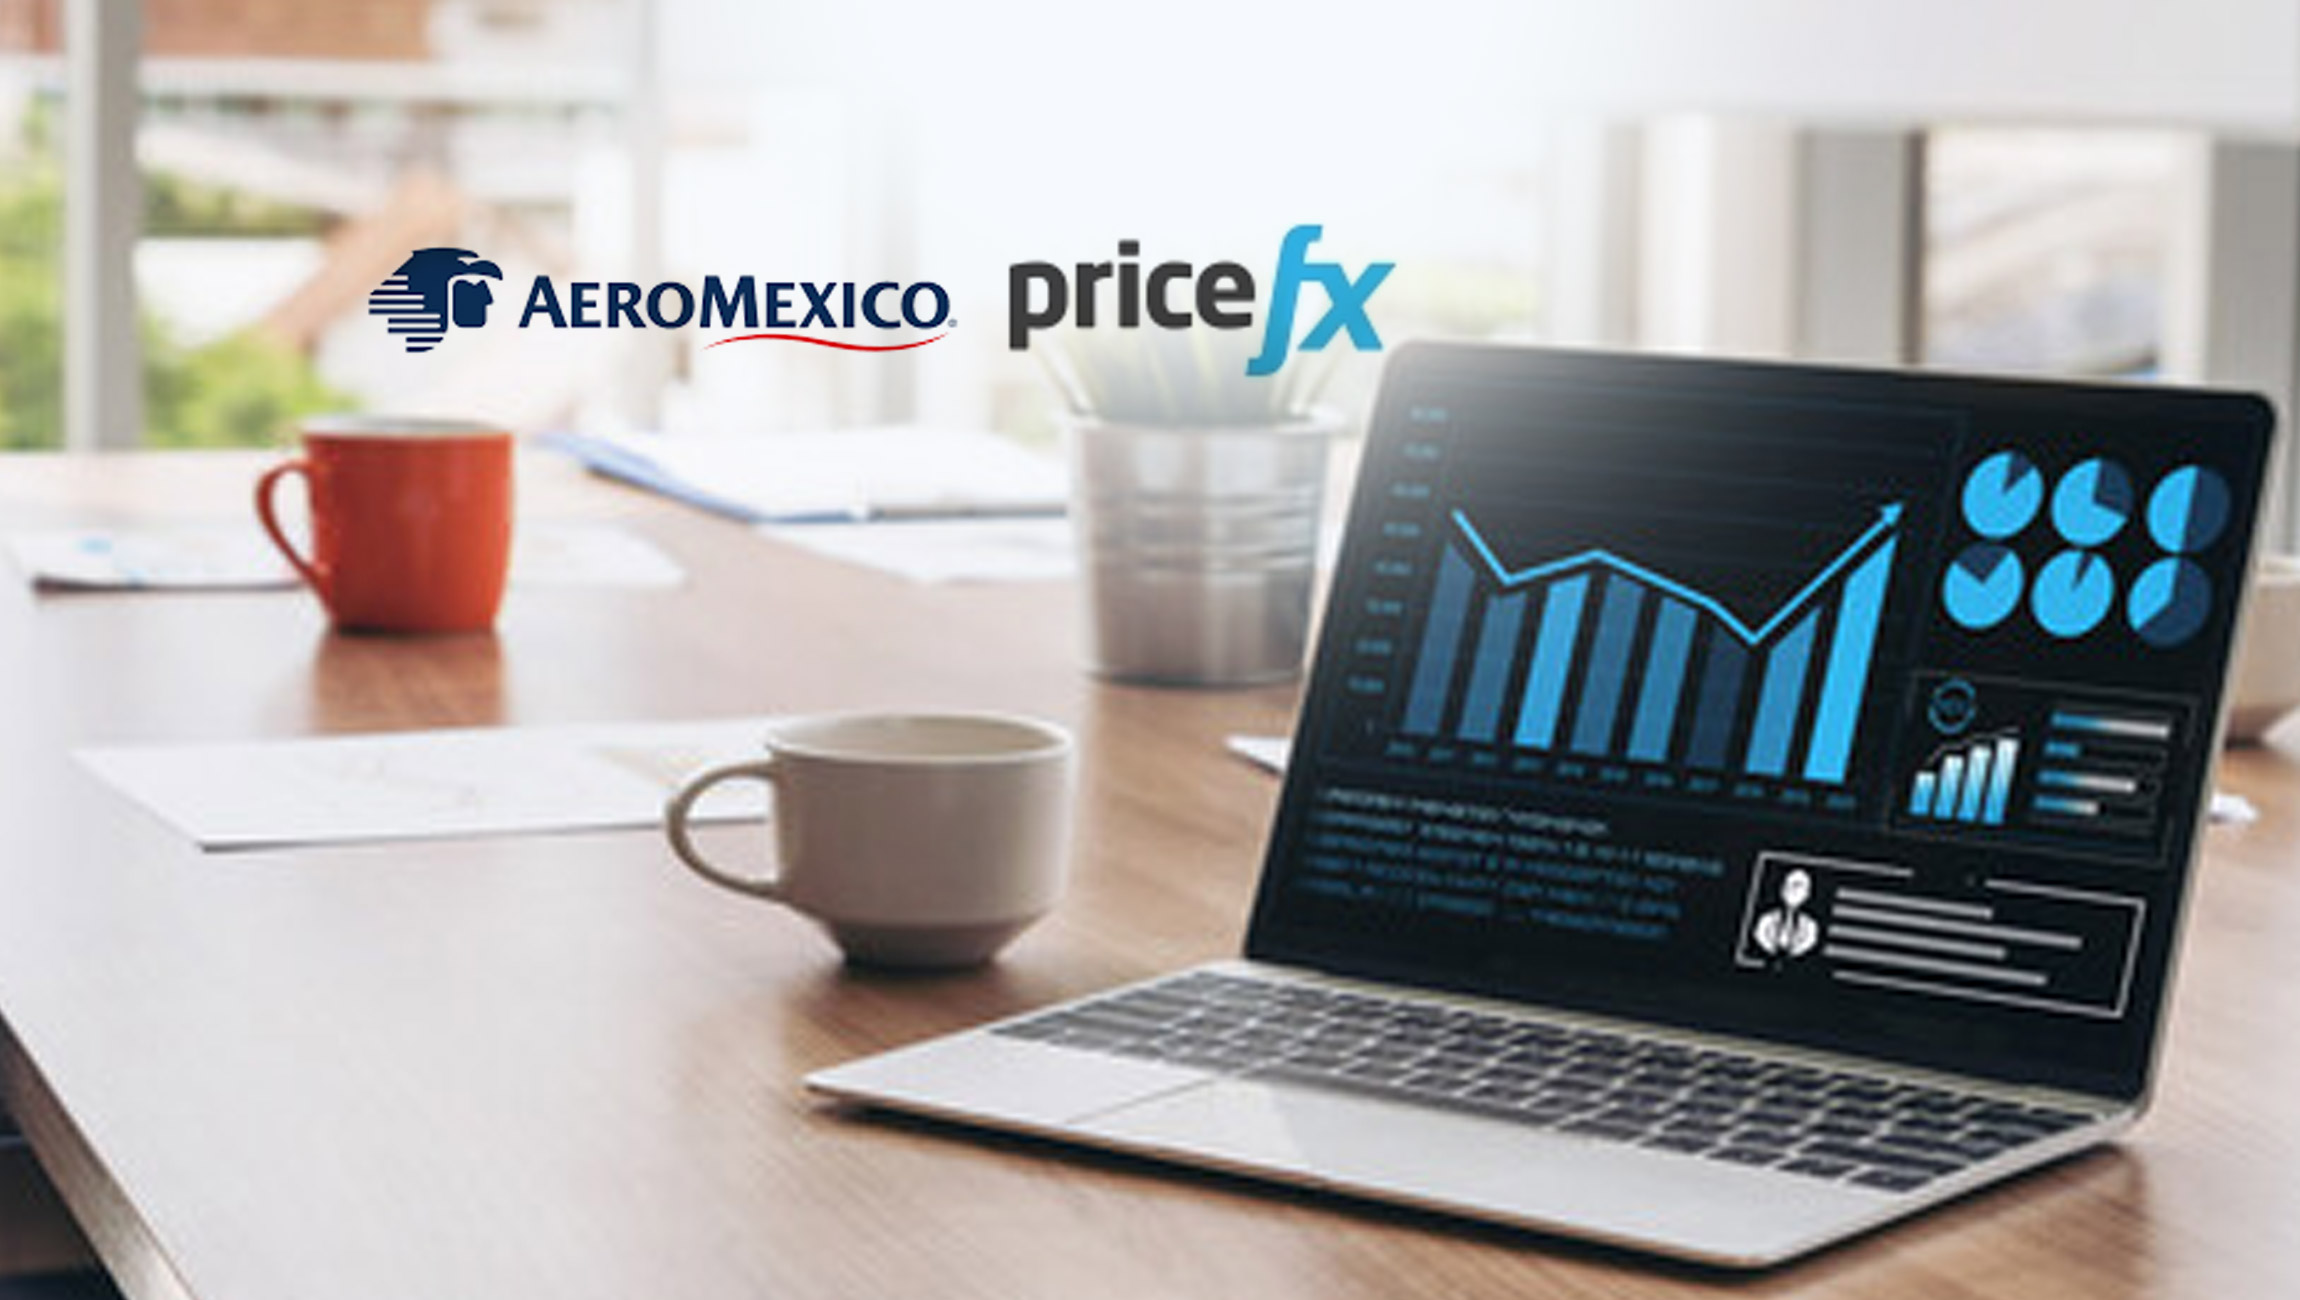 Aeromexico Selects Pricefx to Enhance Sales Analytics Capabilities and Drive Additional Value from their Travel Agency Channel